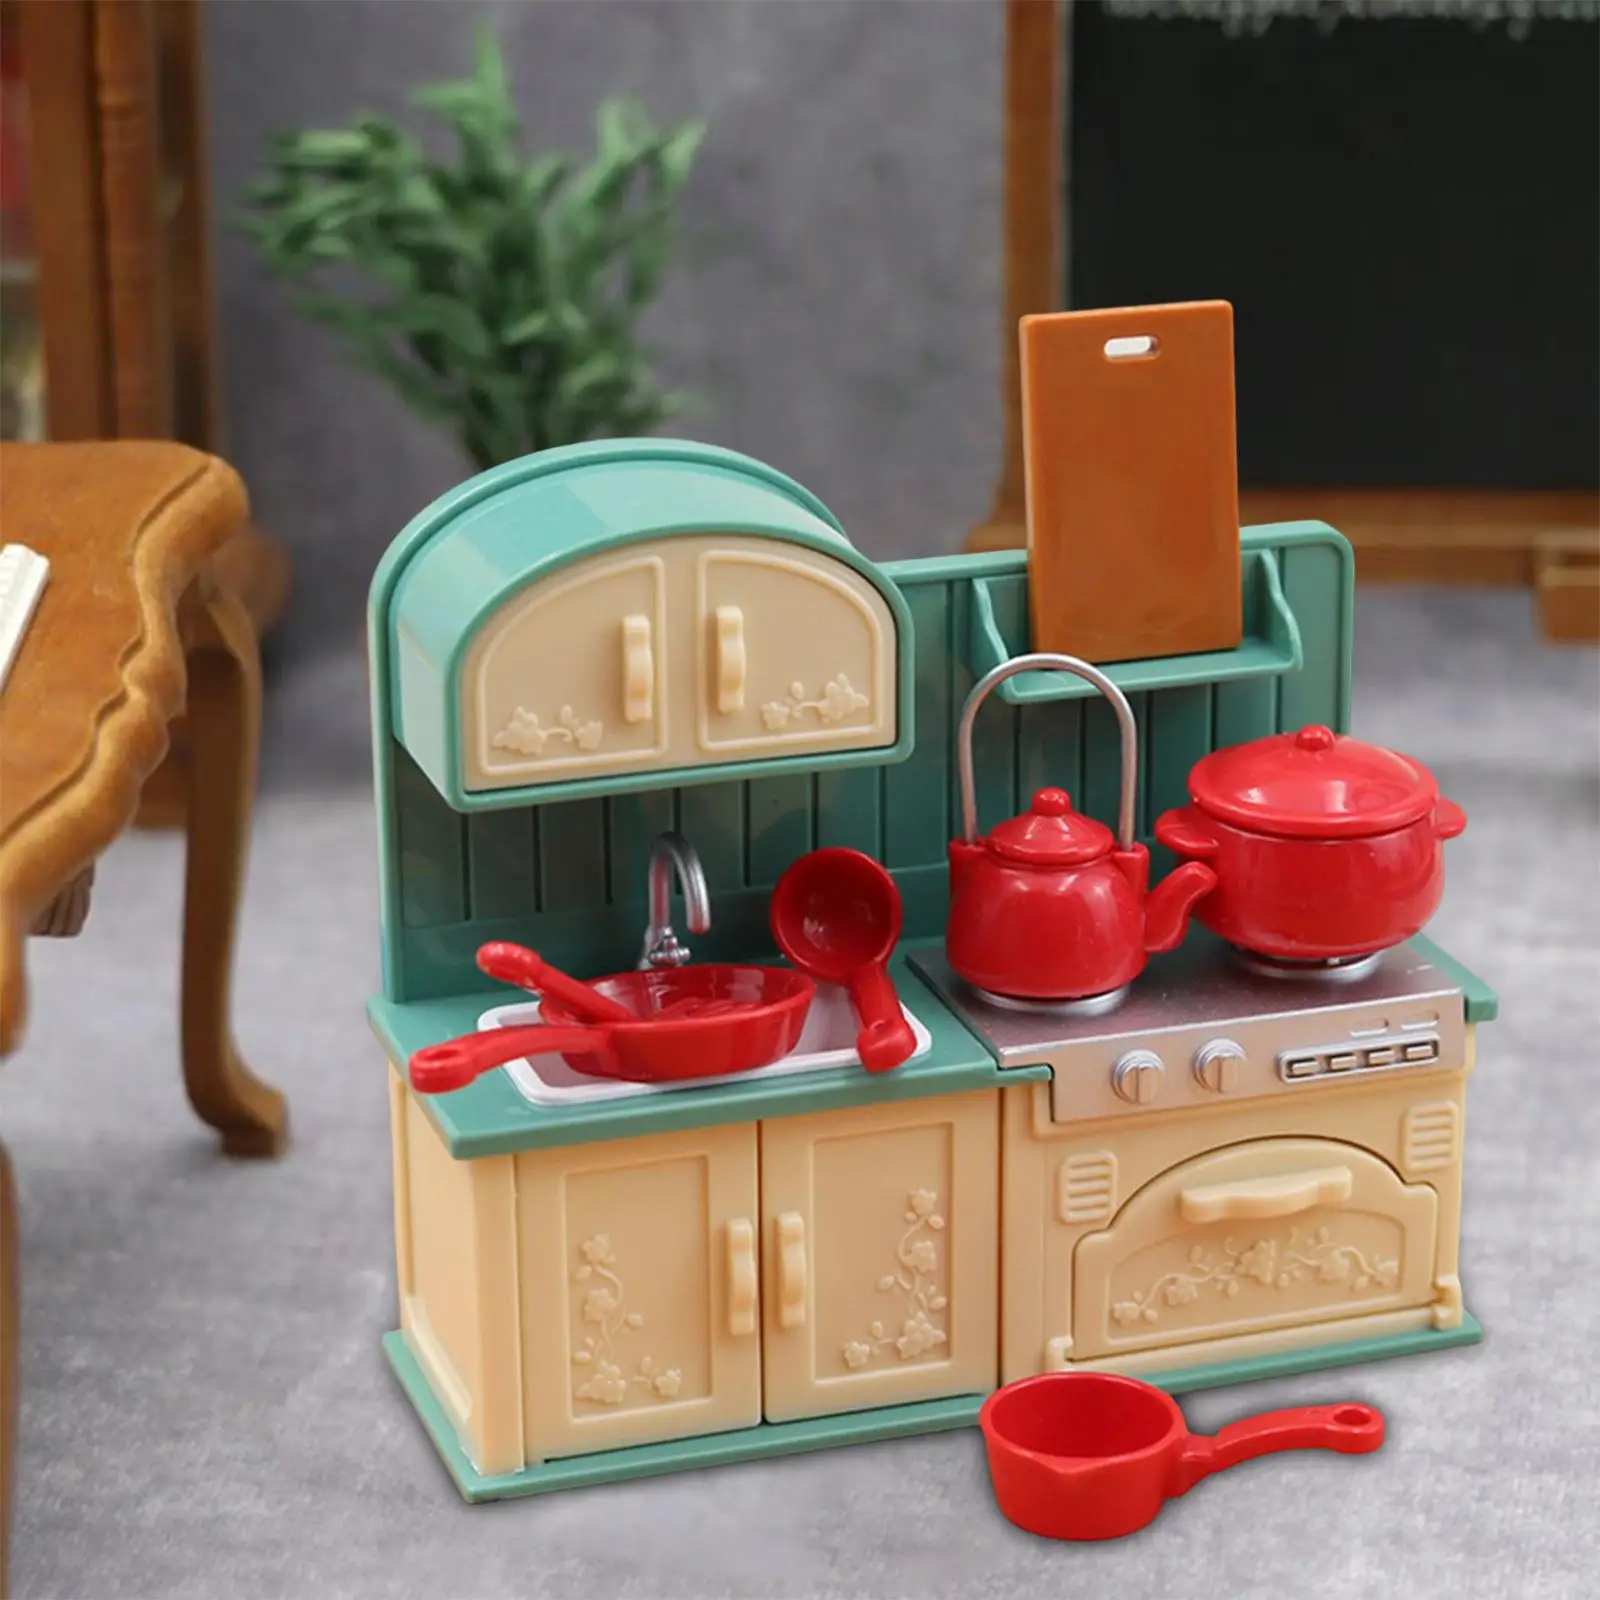 1:18 Scale Dollhouse Play Set Kitchen Accessories Miniature for Boys